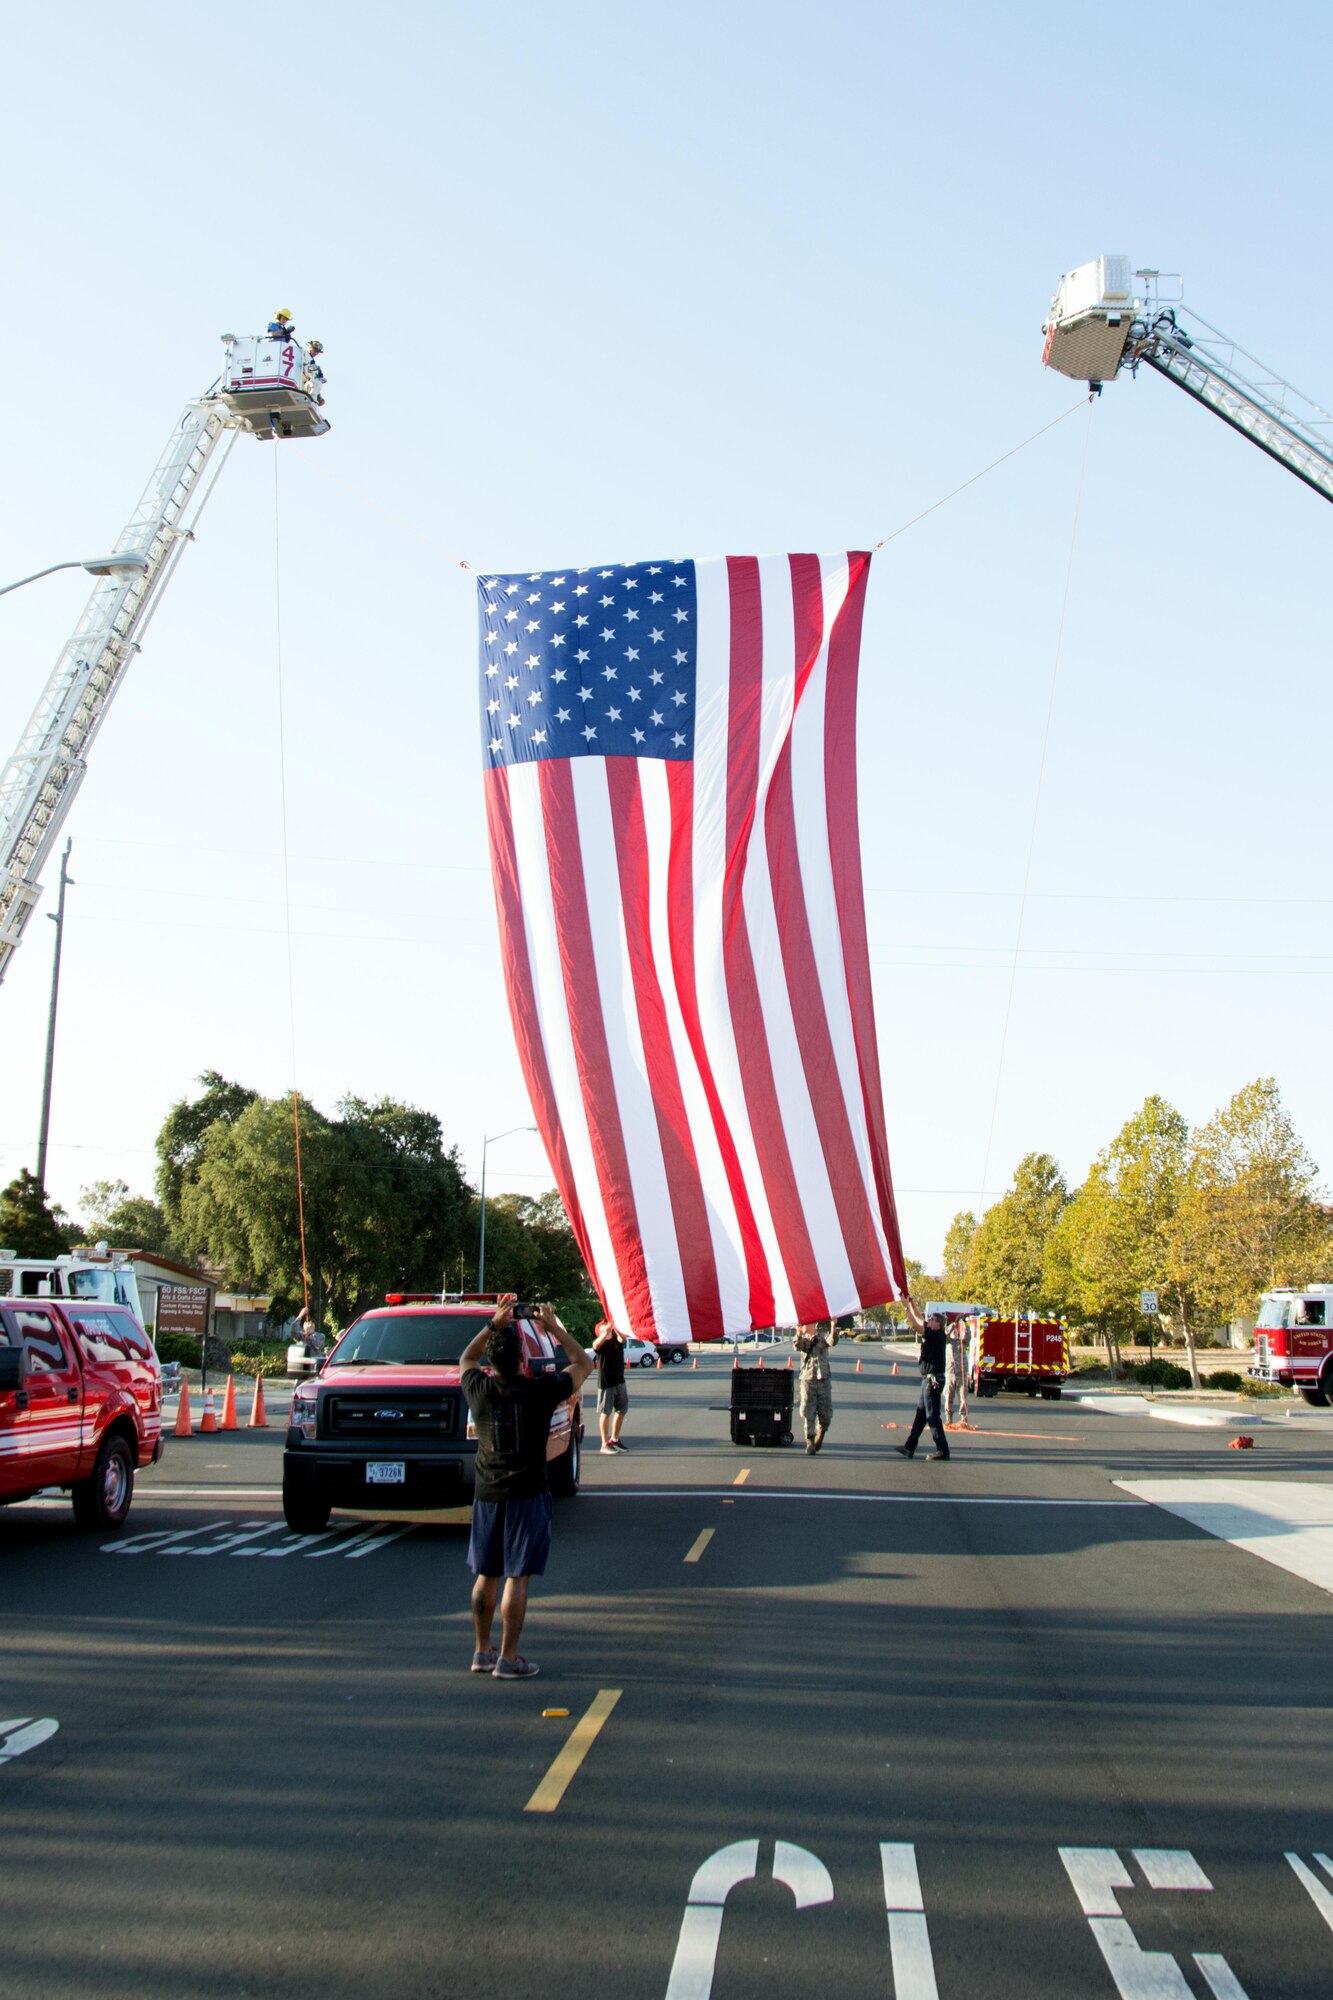 Firefighters from the 60th and 349th Civil Engineer Squadrons and the Suisun City Fire Department hang a flag between two firetrucks before the Run for the Fallen event on Sept. 10, 2016 at Travis Air Force Base, Calif. The run was held to honor the 343 firefighters who lost their lives on Sept. 11, 2001. (U.S. Air Force photo by Senior Airman Shelby R. Horn/Released)